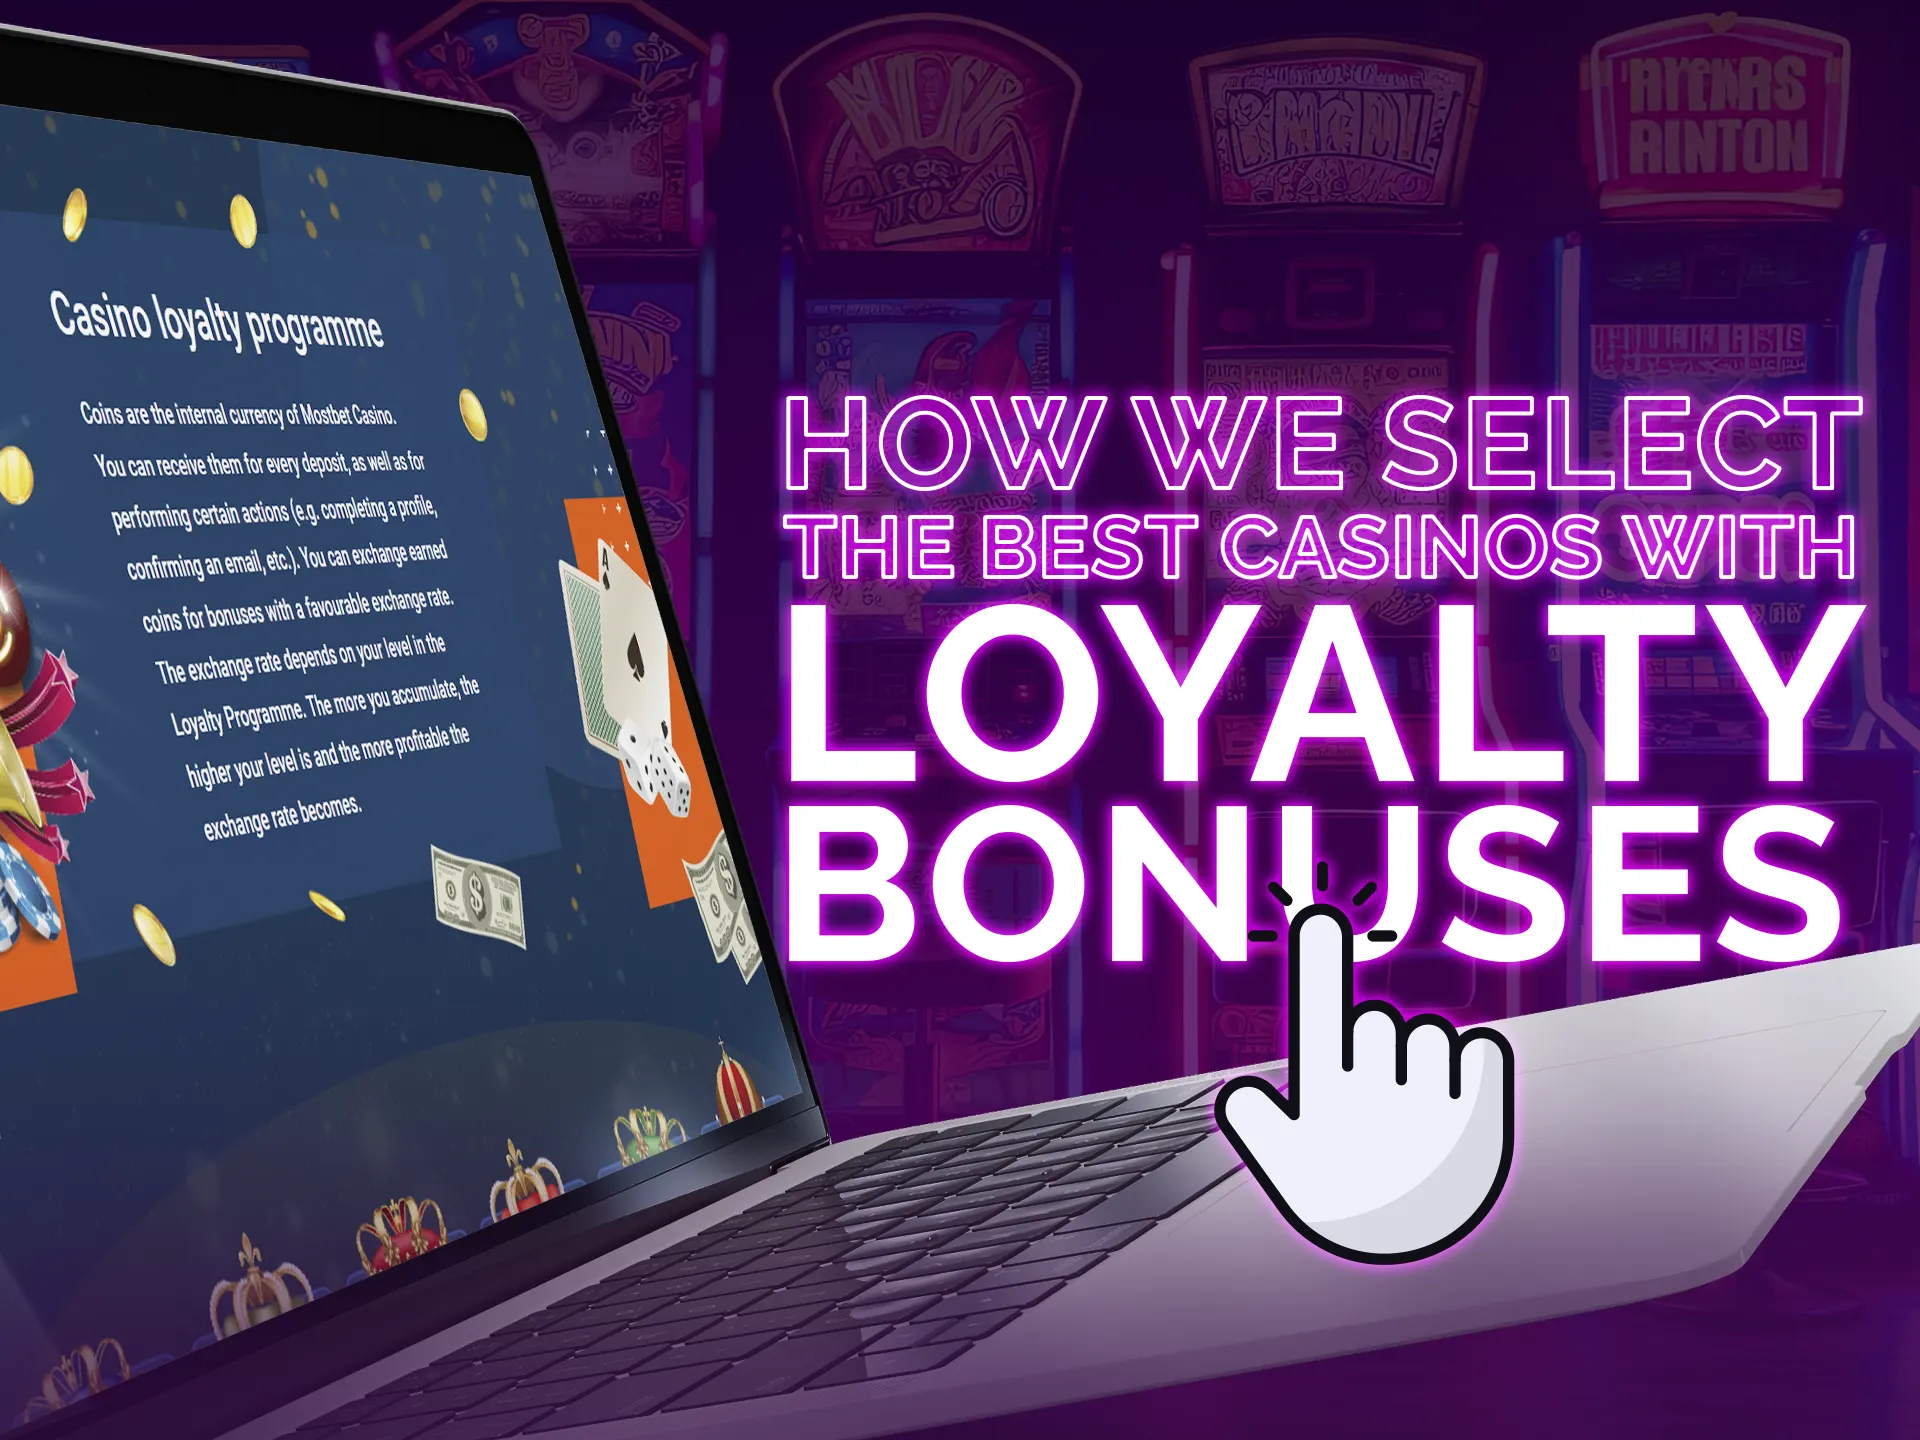 Find out how we selecting best casinos with loyalty bonuses.